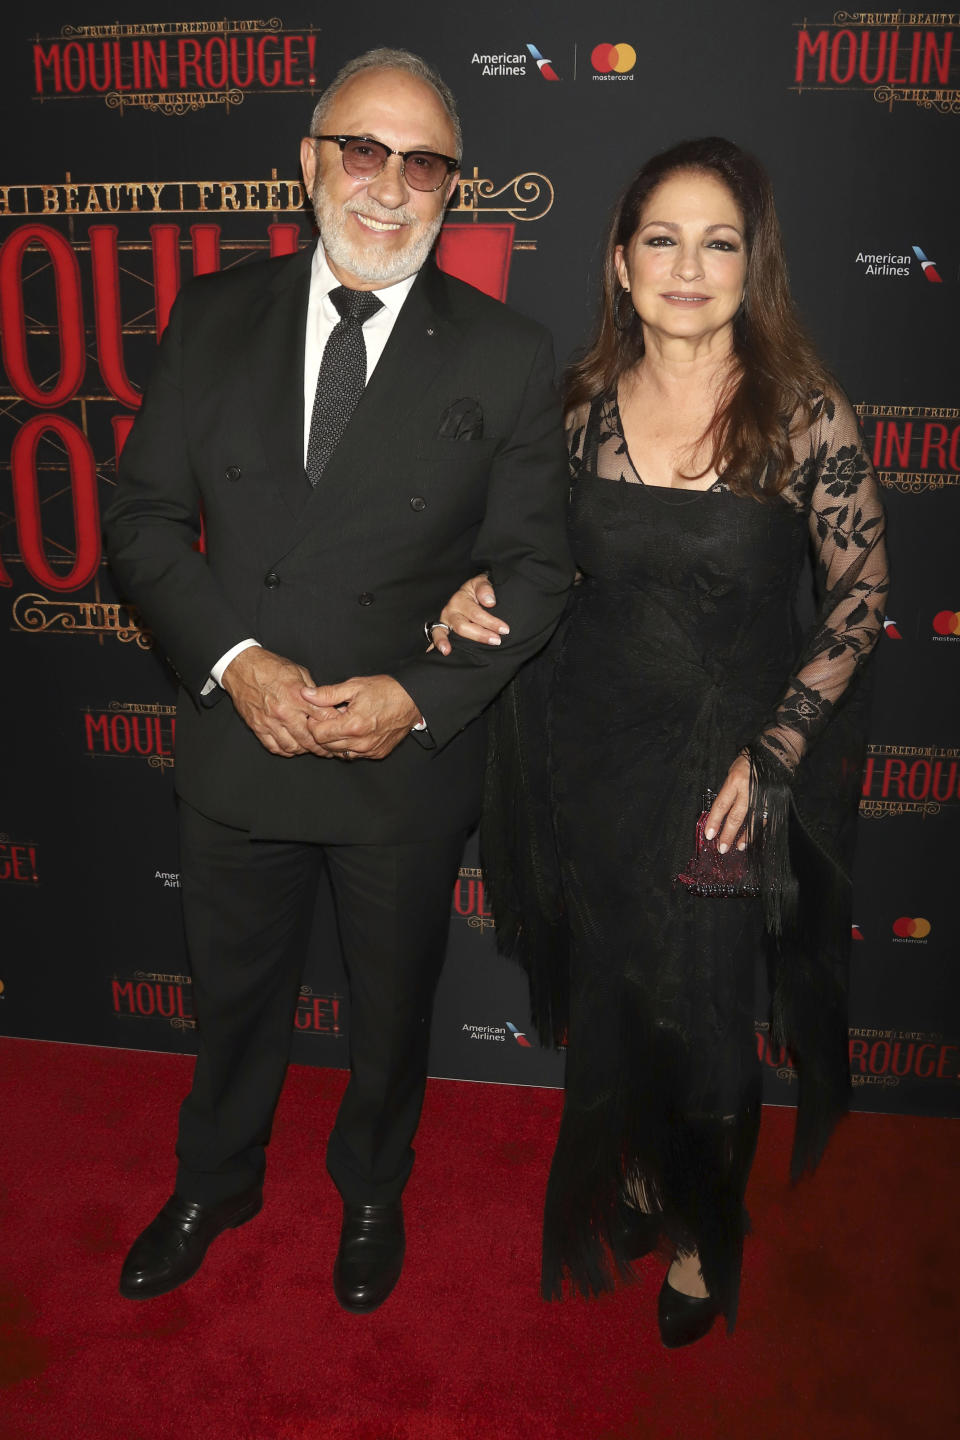 FILE - Emilio Estefan, left, and Gloria Estefan attend the Broadway opening of "Moulin Rouge! The Musical" in New York on July 25, 2019. The couple's restaurant Estefan Kitchen served up homemade meals for health care workers in Miami. (Photo by Greg Allen/Invision/AP, File)